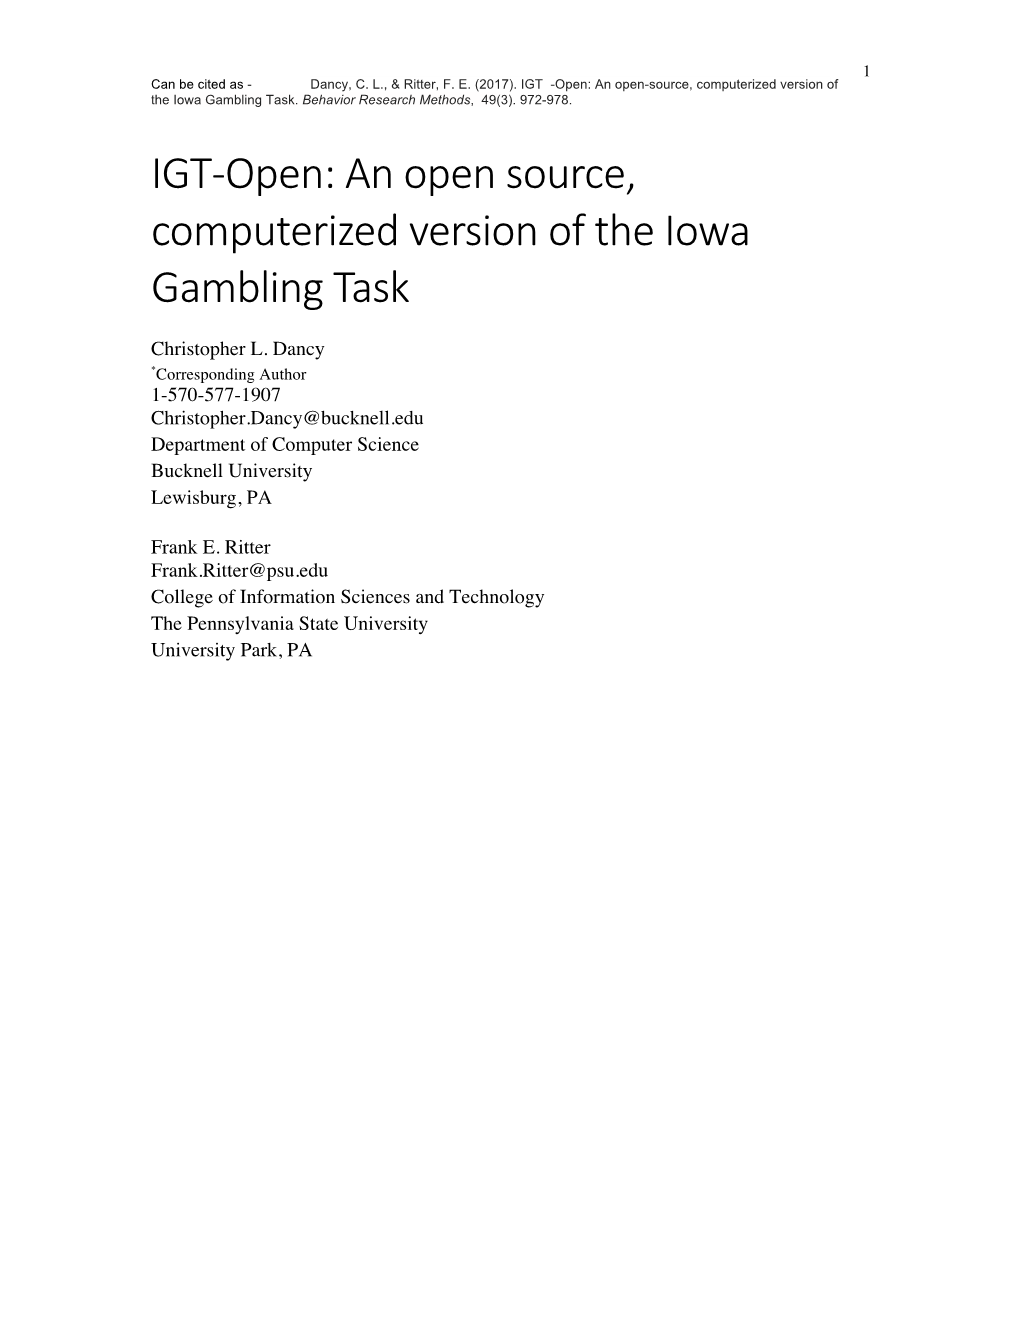 An Open Source, Computerized Version of the Iowa